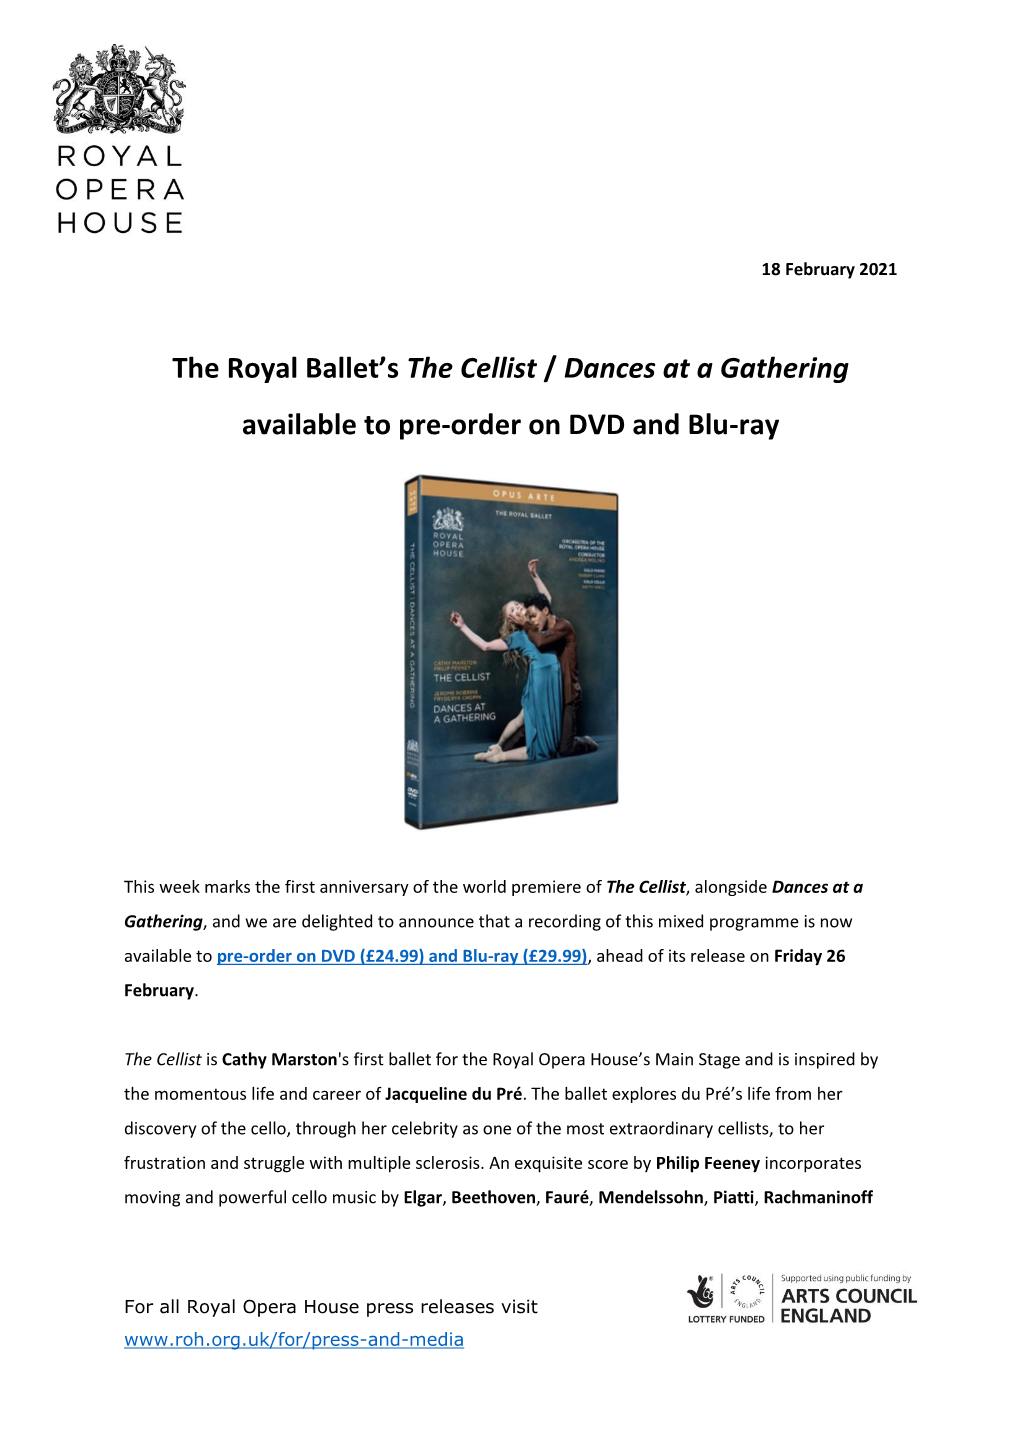 The Royal Ballet's the Cellist / Dances at a Gathering Available To